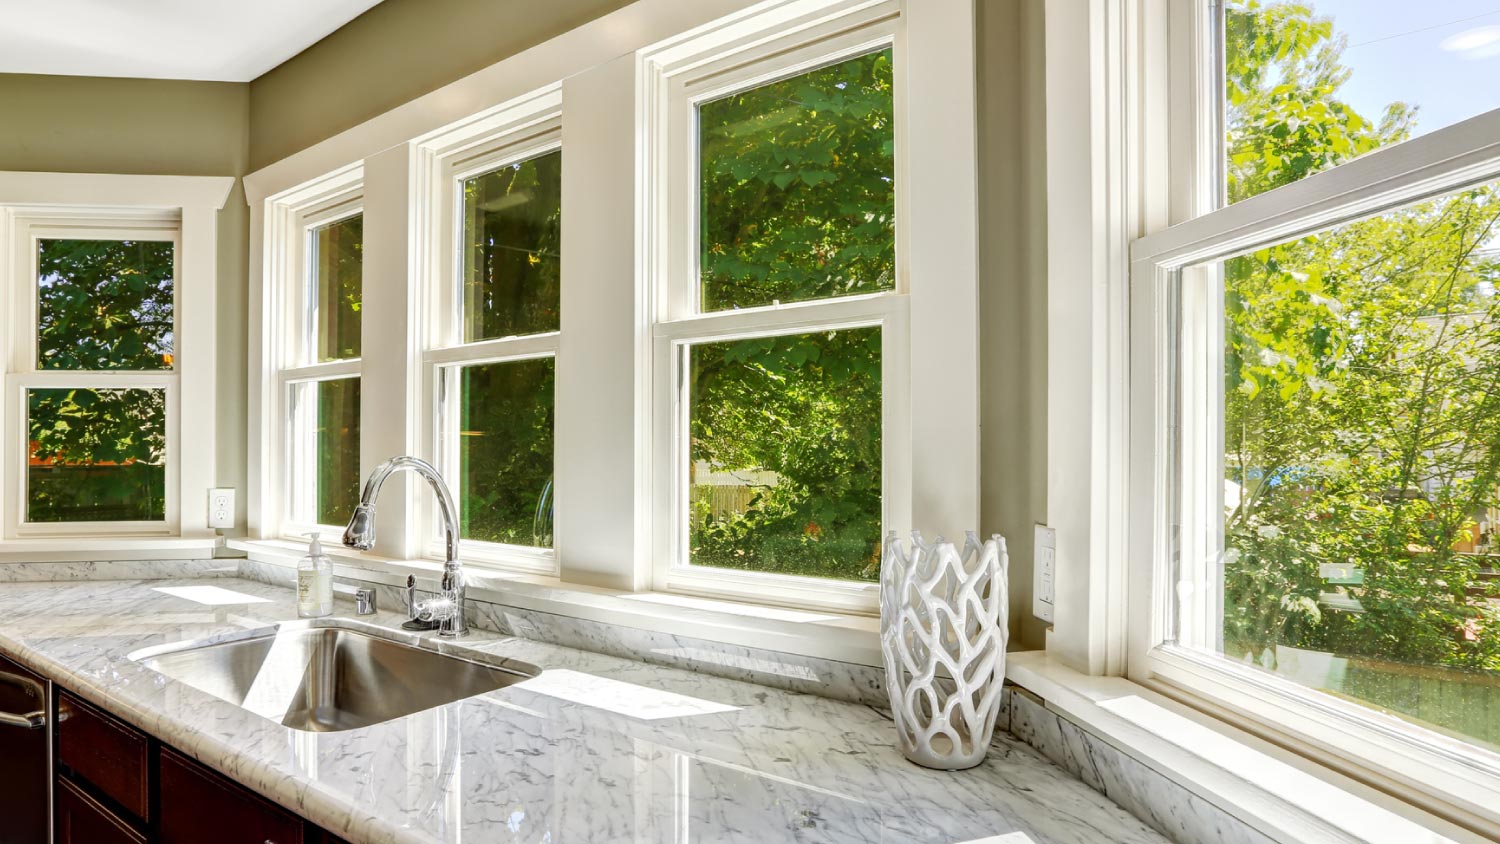 How to select new windows for your house?